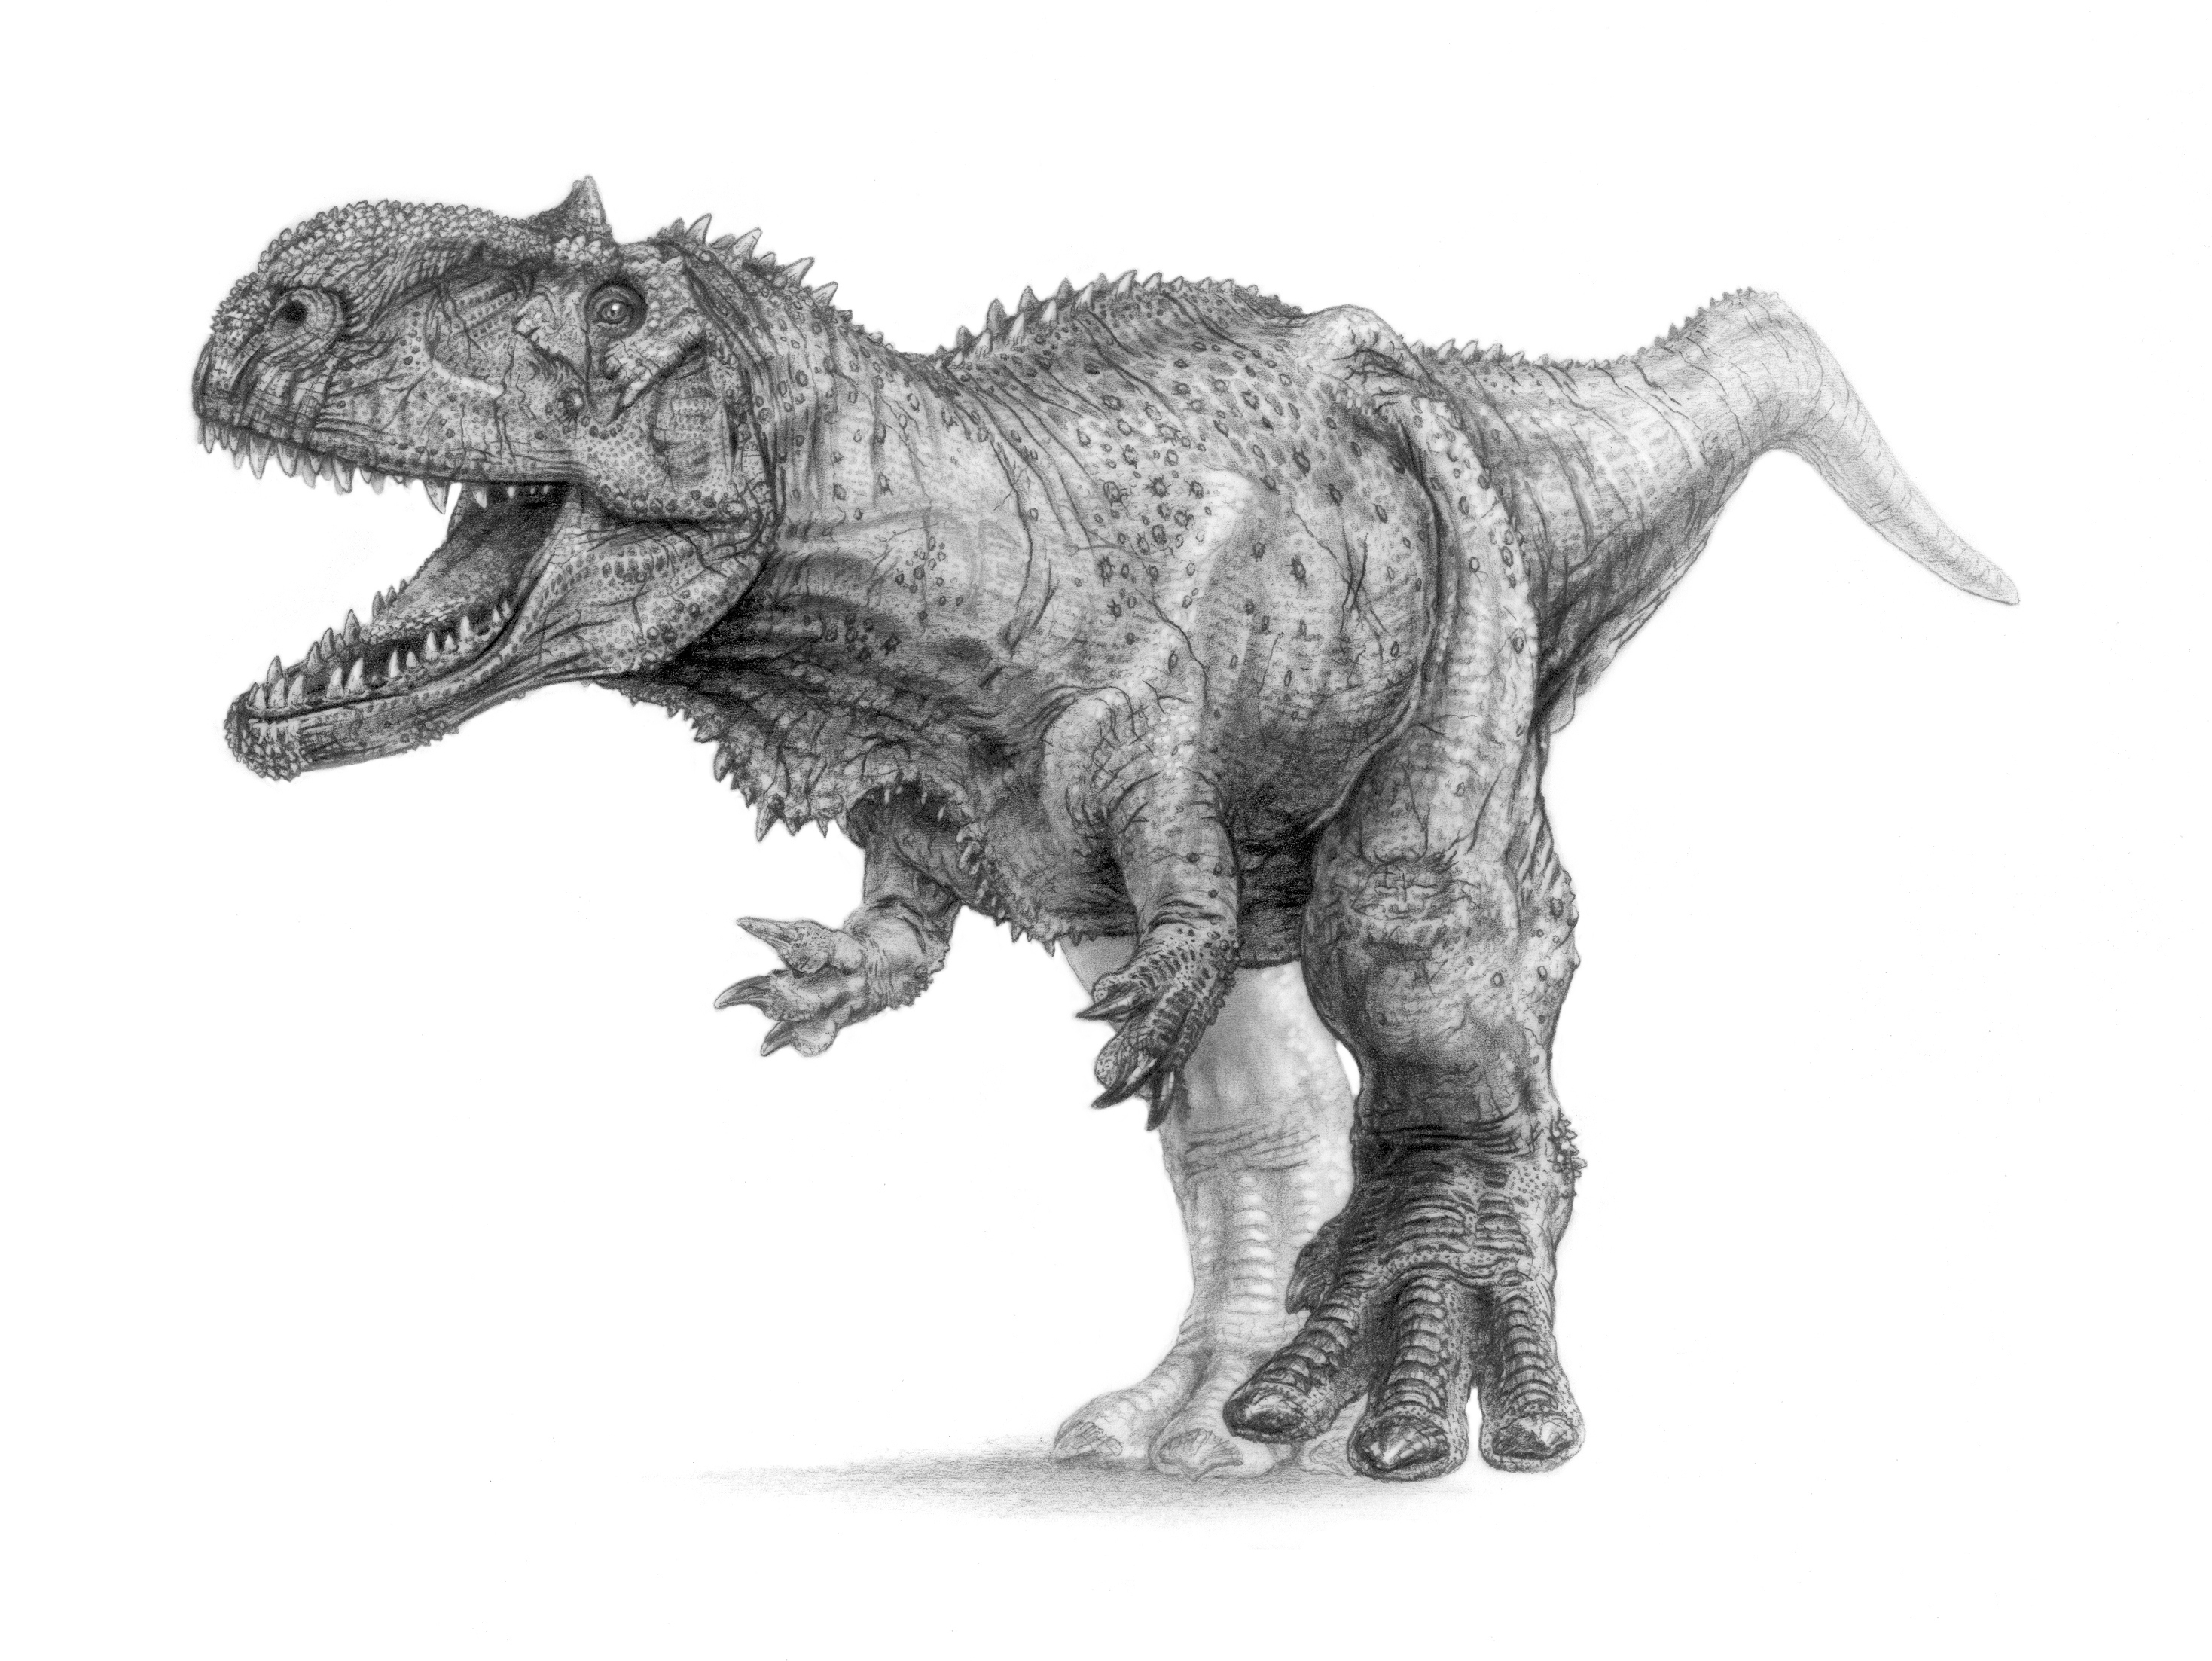 Dinosaur Drawing - Tips and Techniques for Creating Amazing Dino Art